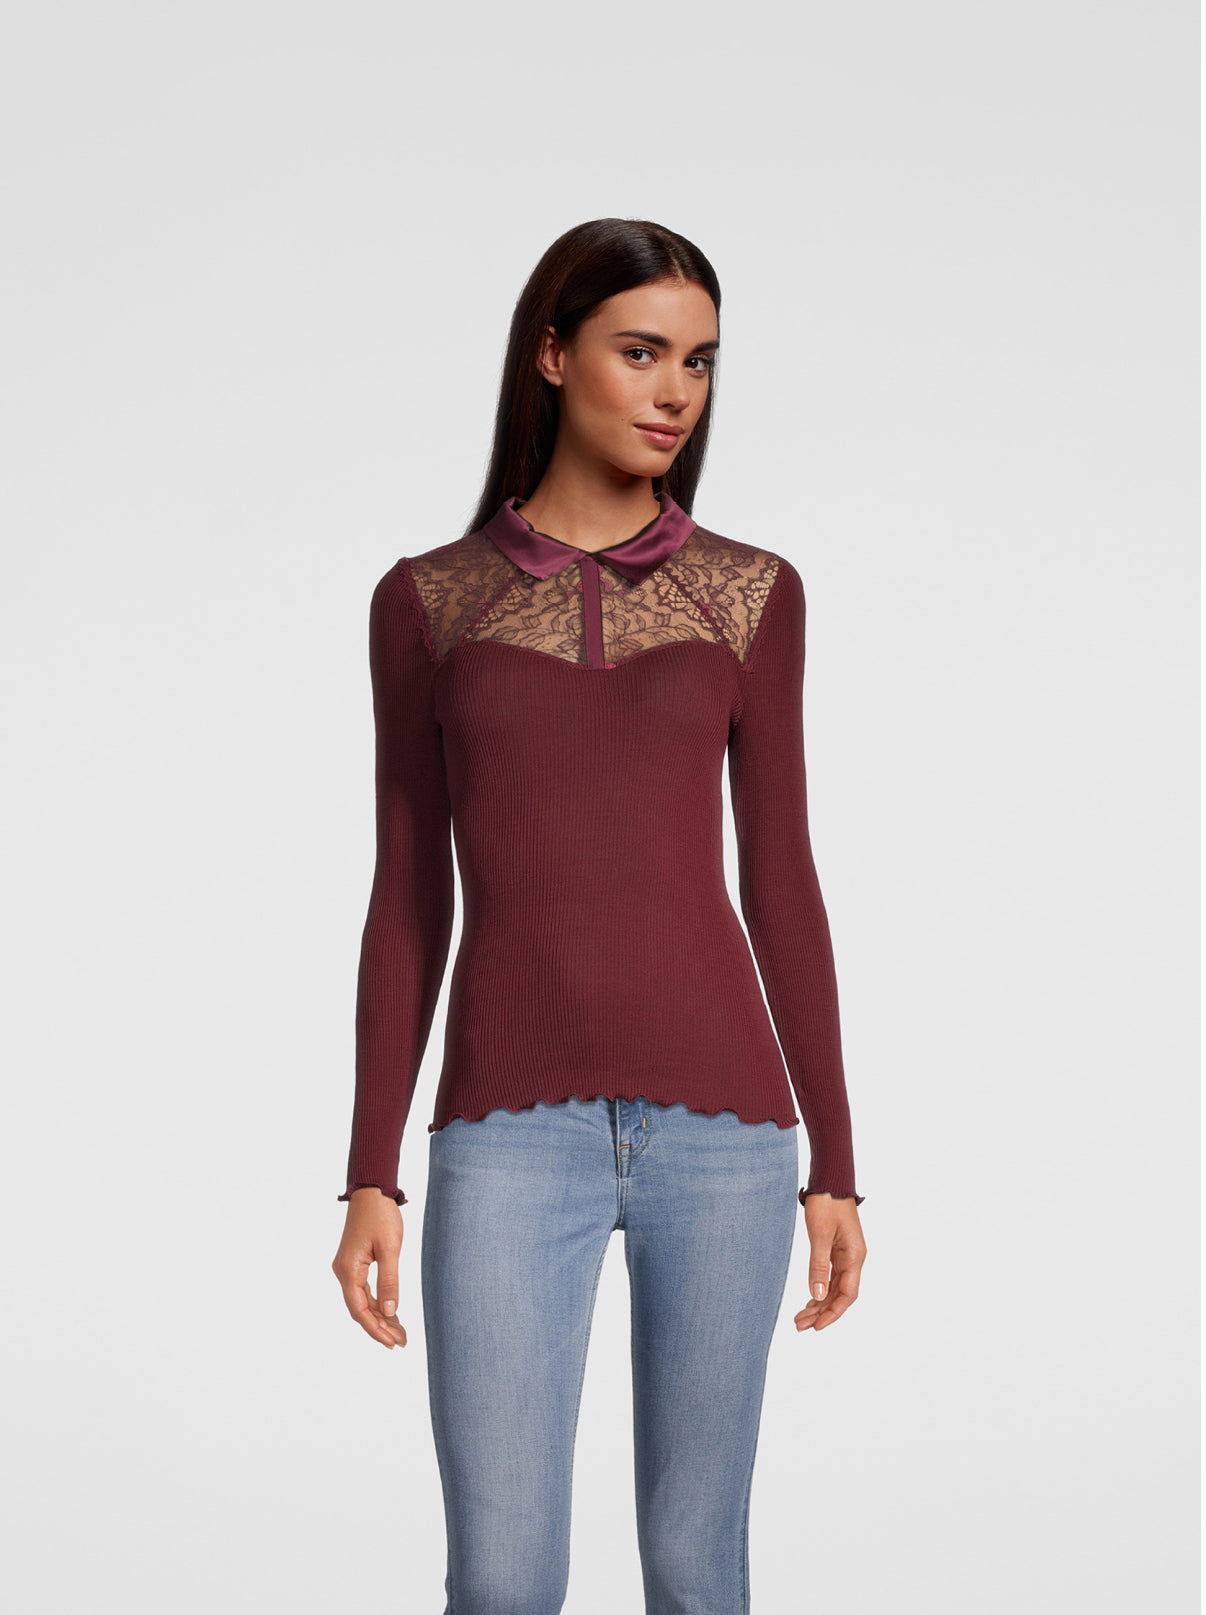 Long Sleeves Shirt with Leavers lace 6466 - Oscalito